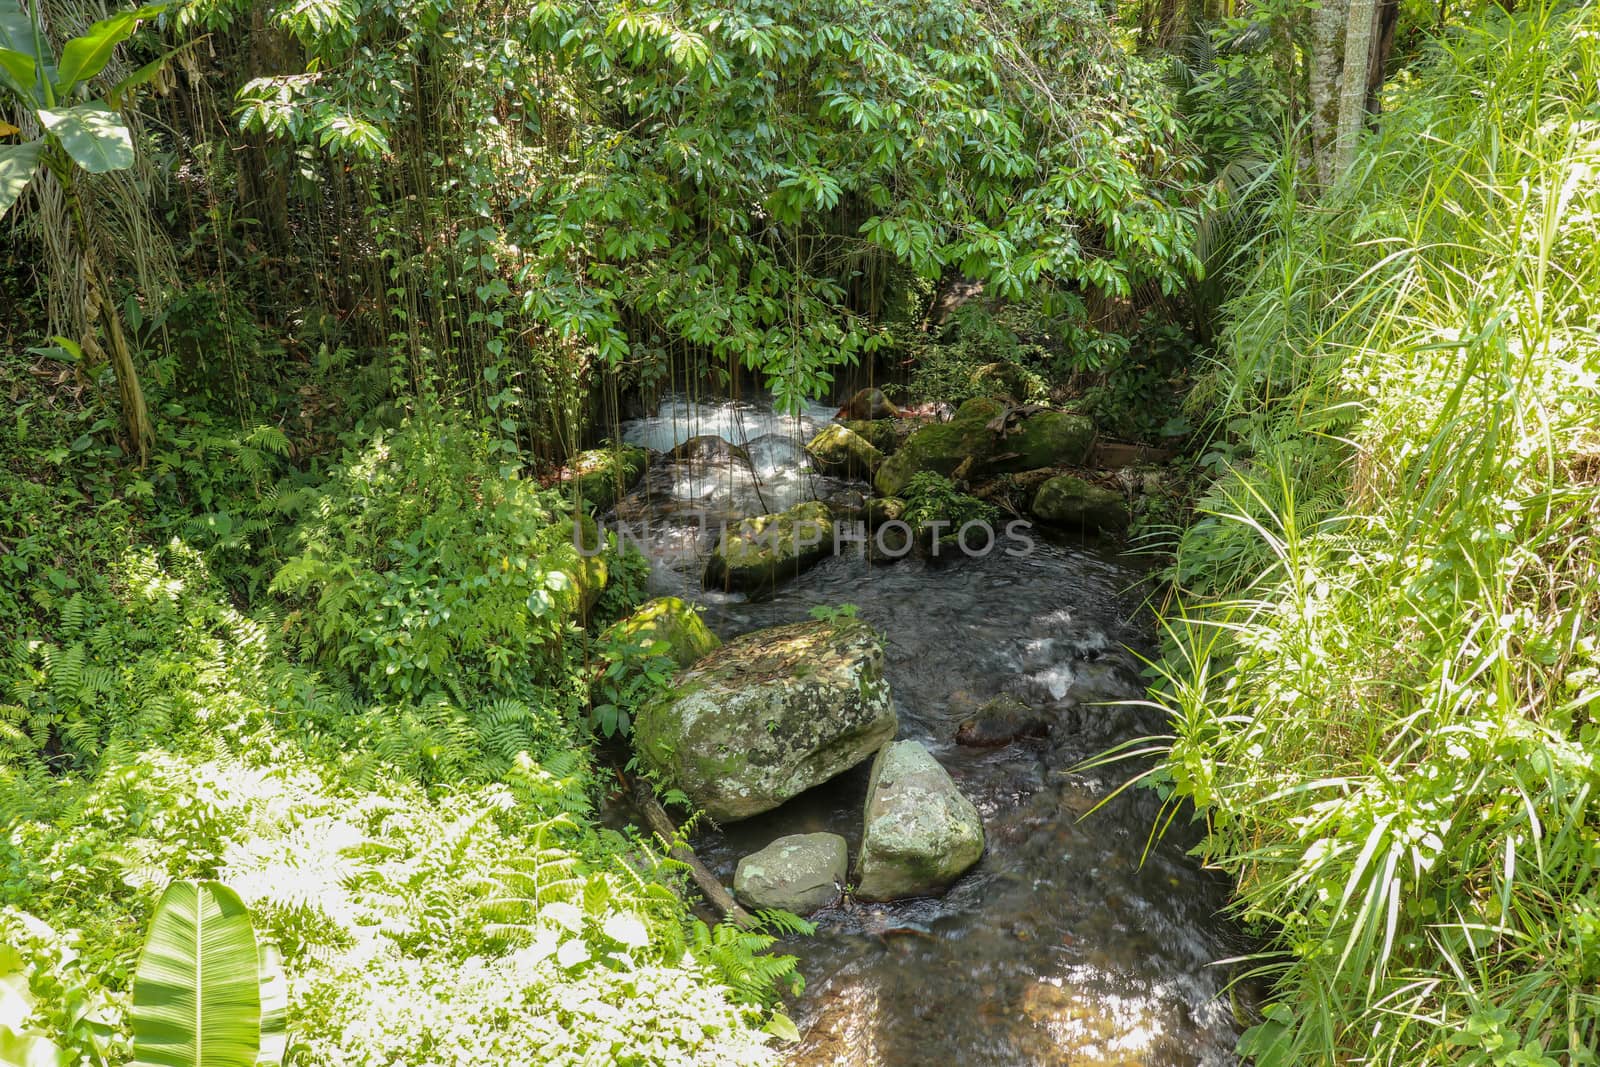 River bed in Pakerisan valley with wild water and big boulders. Water rolling over rocks in a river bed at a funeral complex in Tampaksiring. Gunung Kawi, Bali, Indonesia. Tropical vegetation.